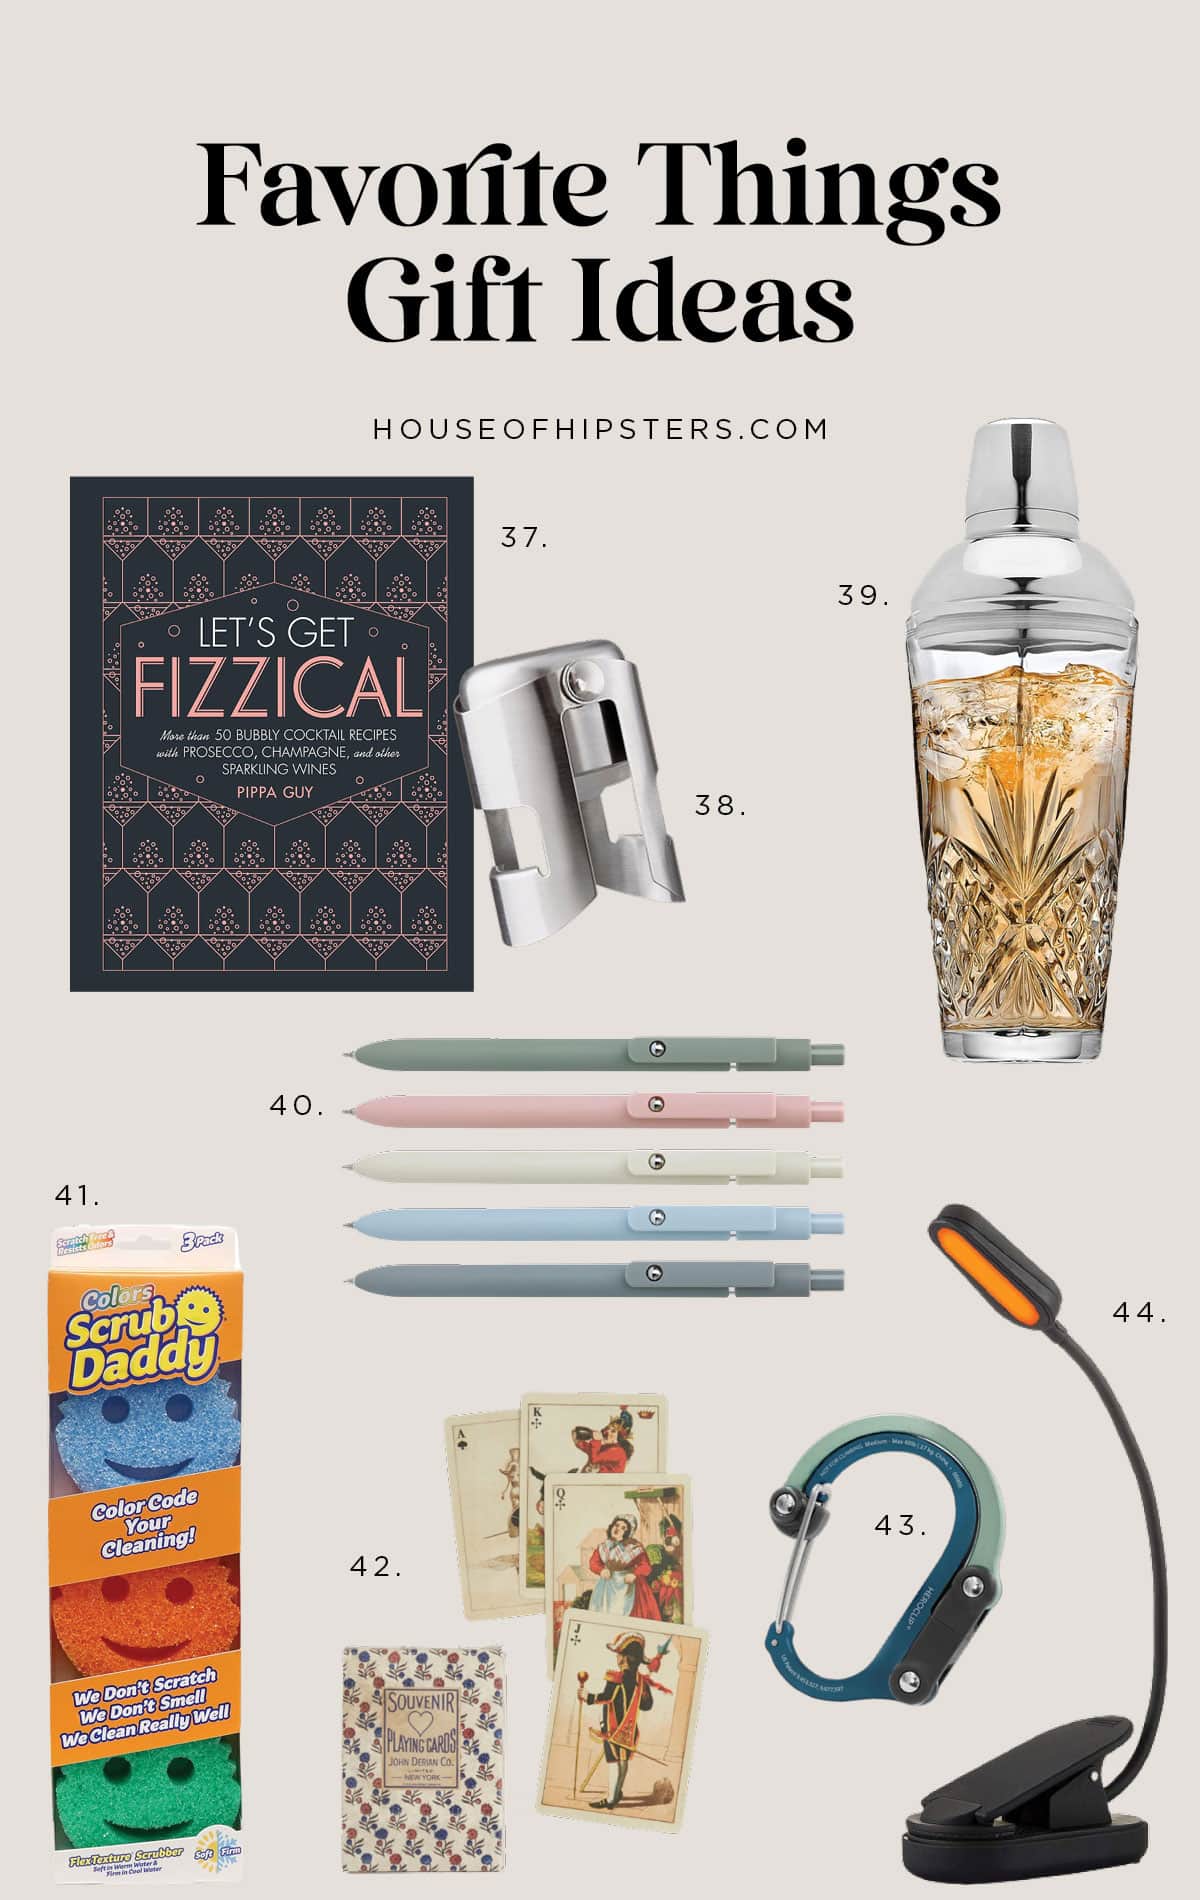 45 Favorite Things Gift Ideas from a cocktail recipe book to a bougie cocktail shaker. 